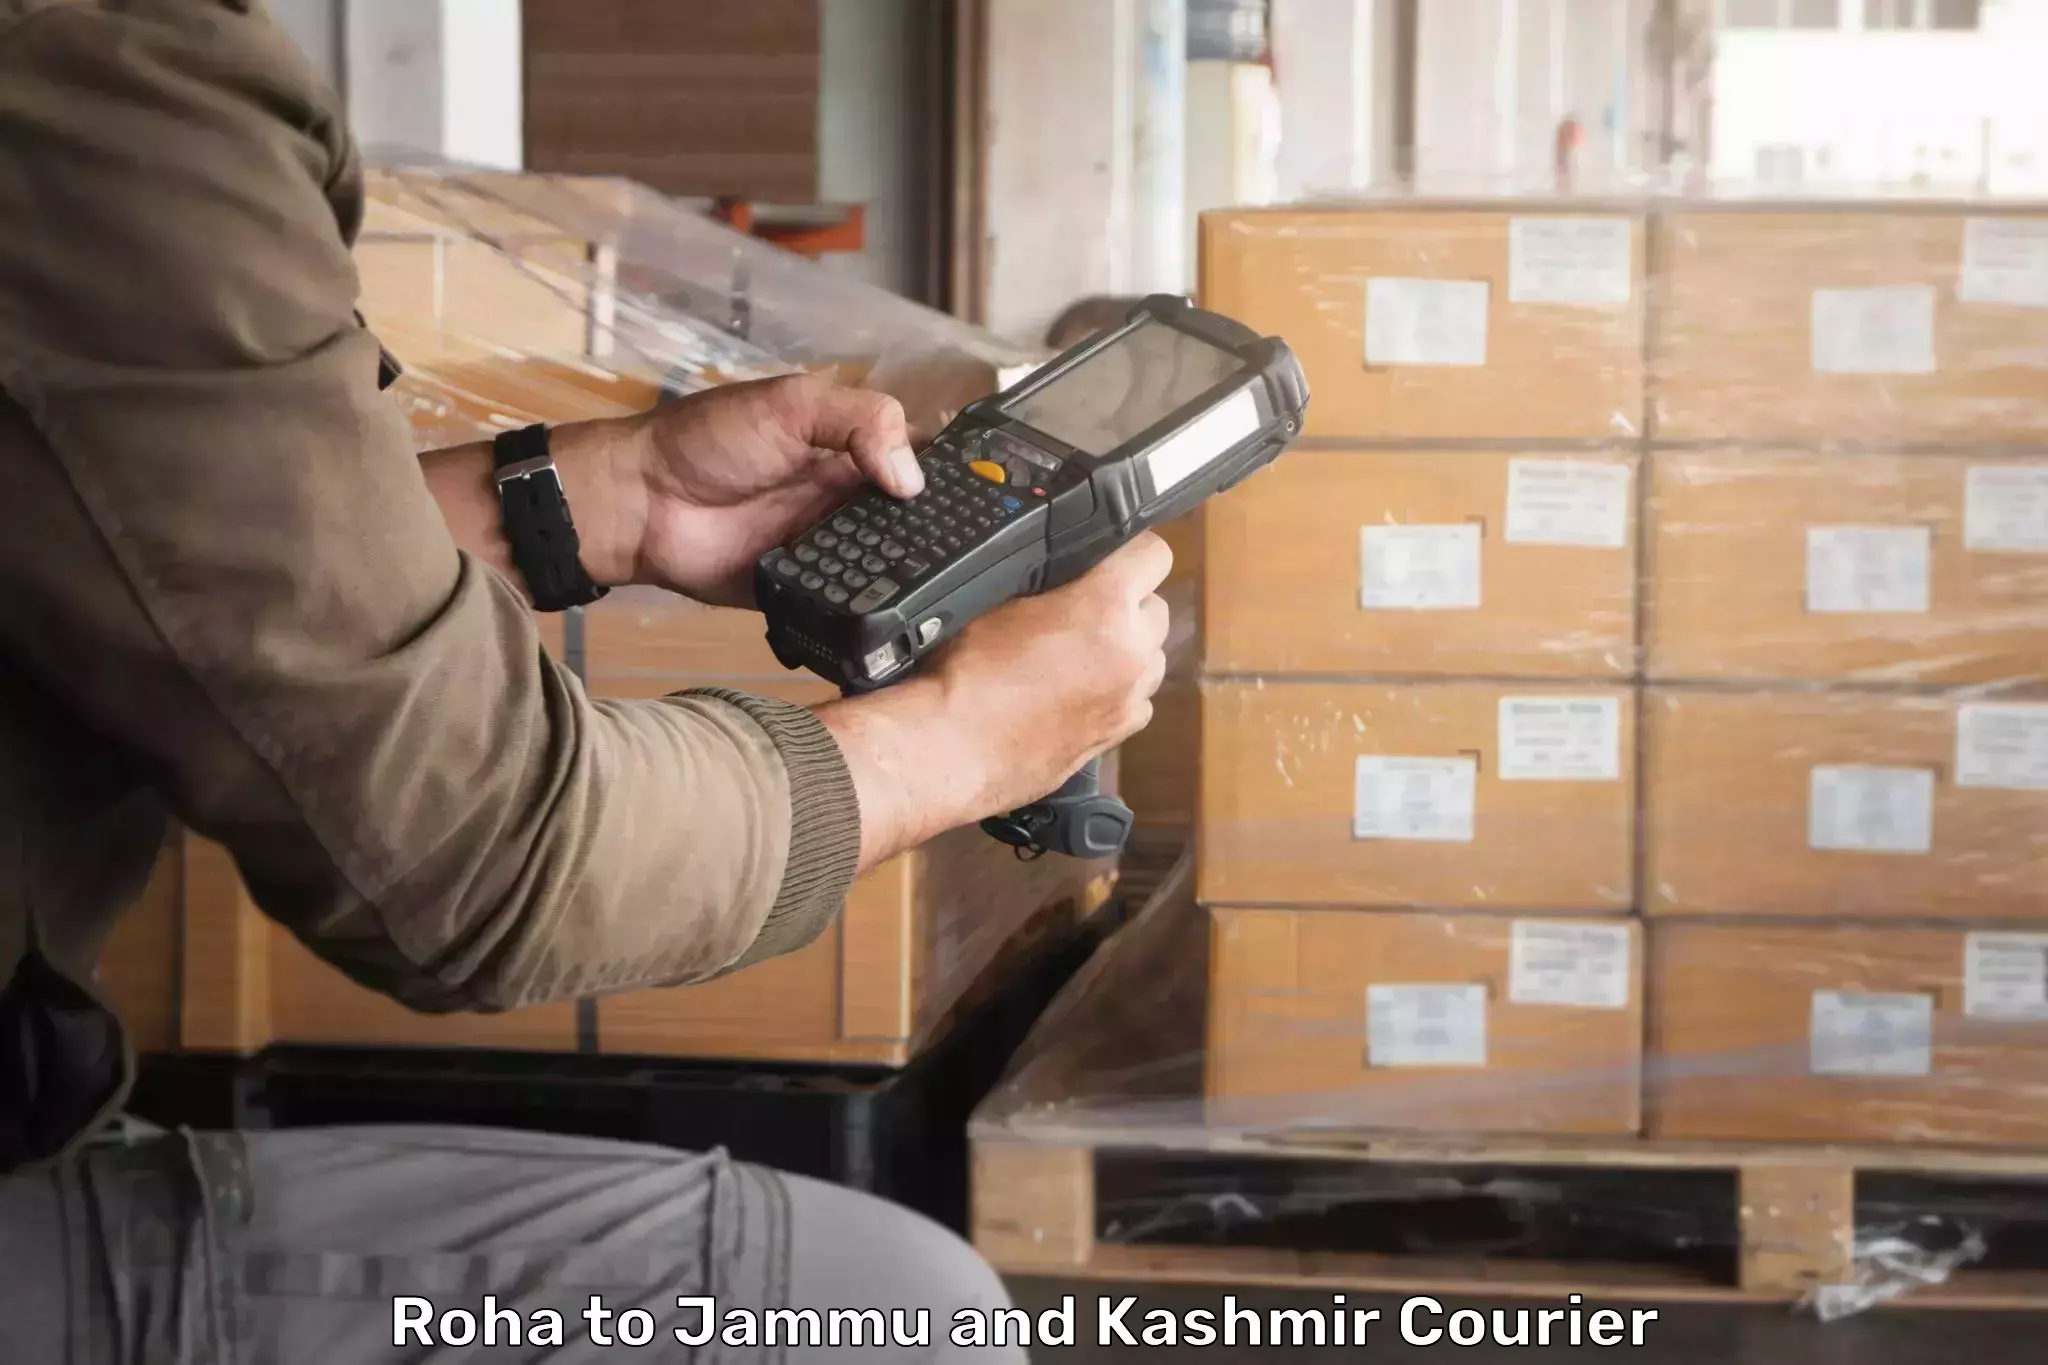 Bulk courier orders in Roha to Leh